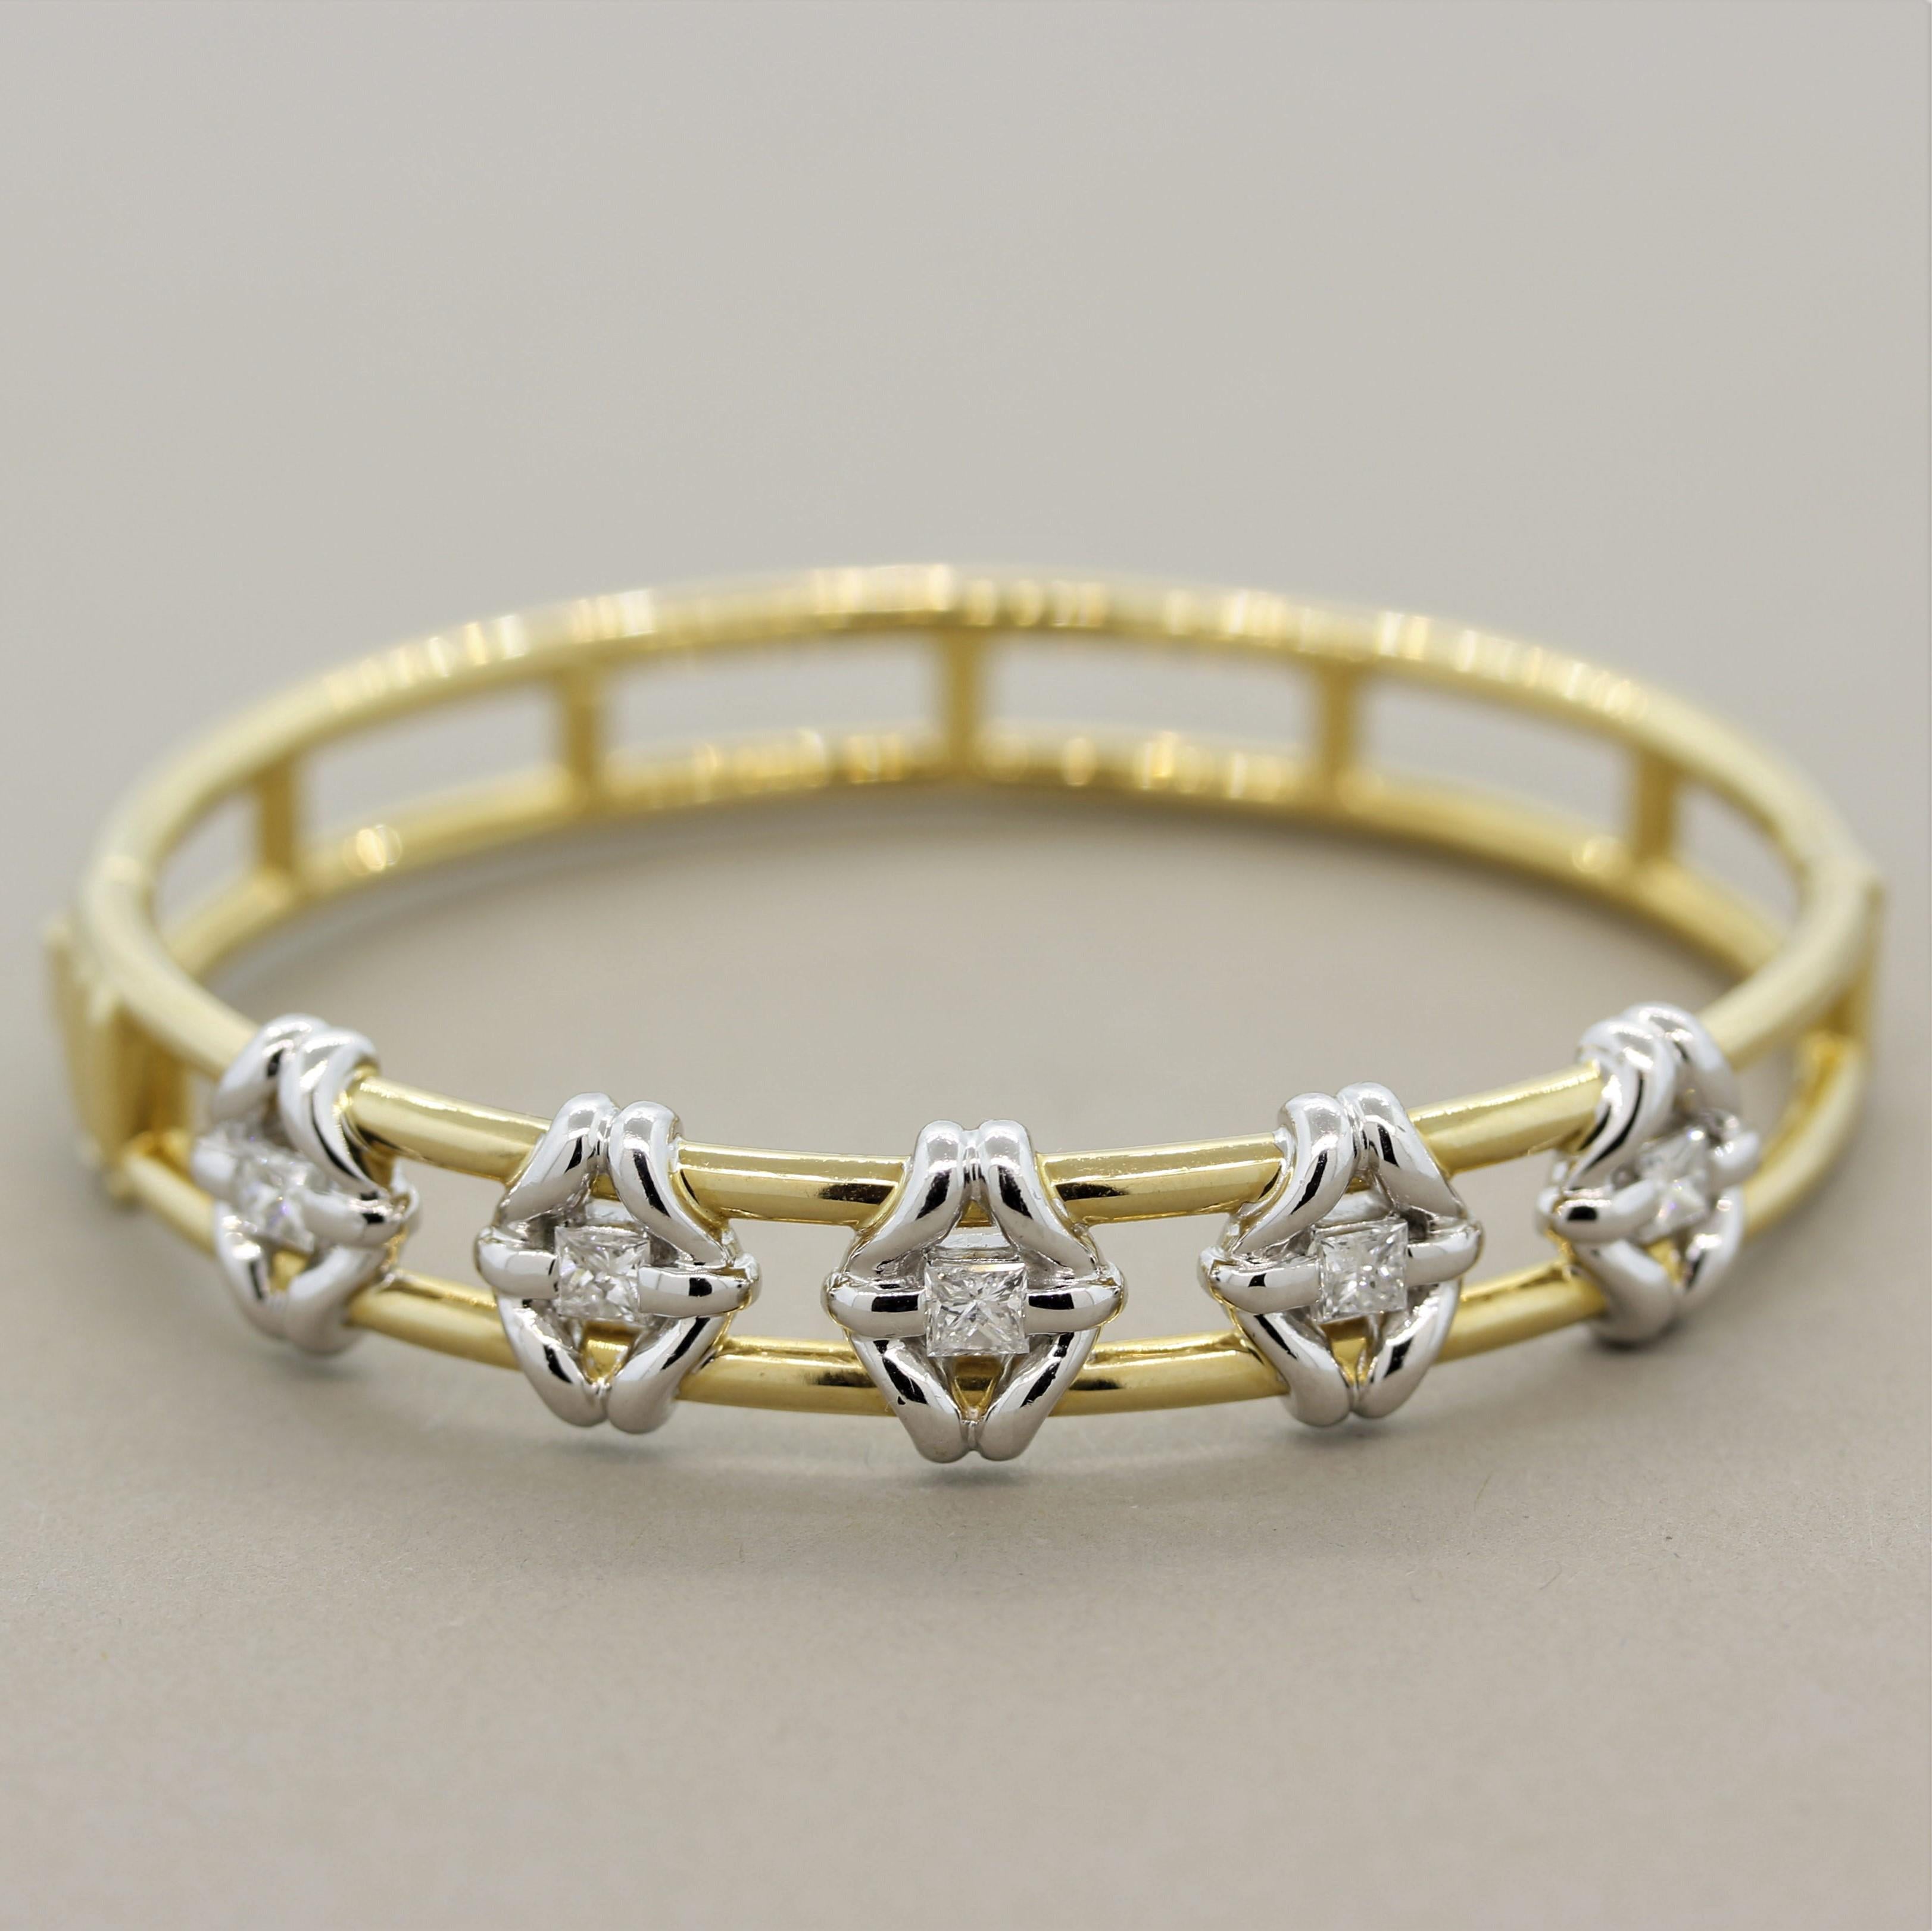 A uniquely styled bangle bracelet featuring 5 large princess cut diamonds weighing a total of 1.12 carats. They are set in platinum while the rest of the bracelet is made in yellow gold giving the piece a two-toned look. Made in 18k gold and